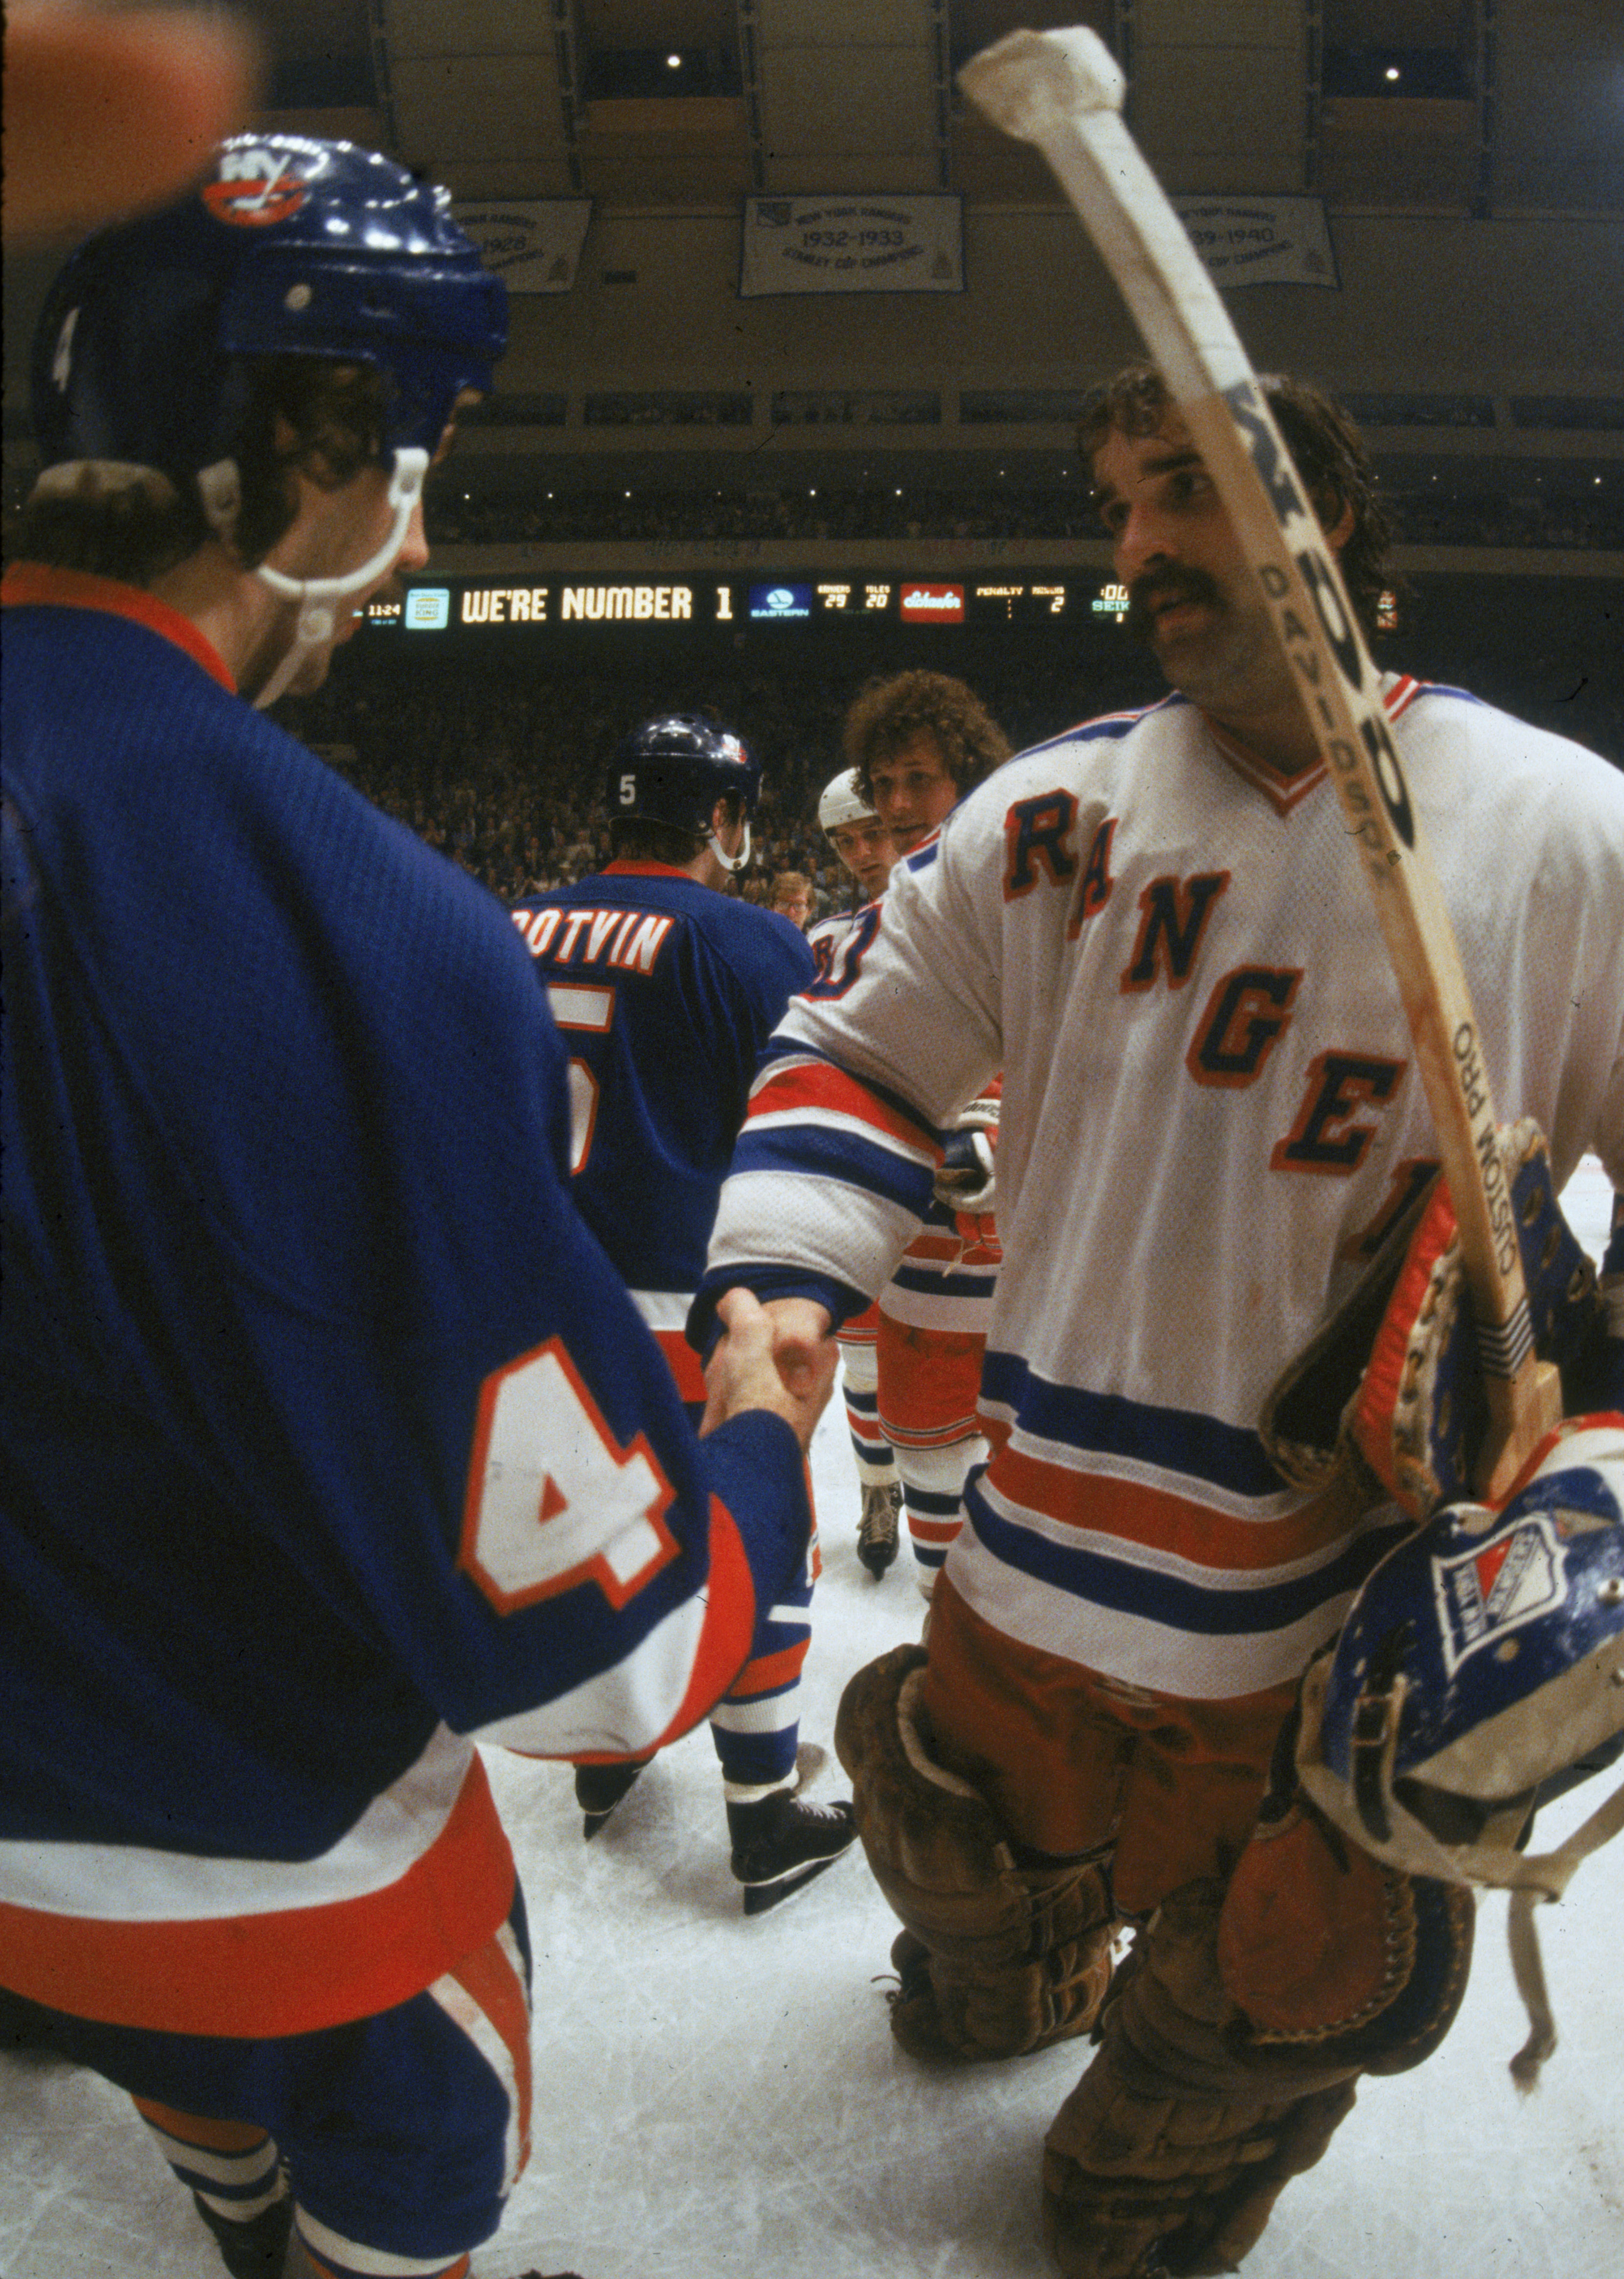 Canadian hockey player John Davidson (right), goalkeeper for the New York Rangers, shakes hands with Bob Lorimer (left) of the New York Islanders following a playoff game at Madison Square Garden, New York, New York, 1979. Also visible are Islander Denis Potvin (#5) who shakes with Ranger Ron Duguay, and Ranger Ron Greschner (behind Duguay). (Photo by Melchior DiGiacomo/Getty Images)